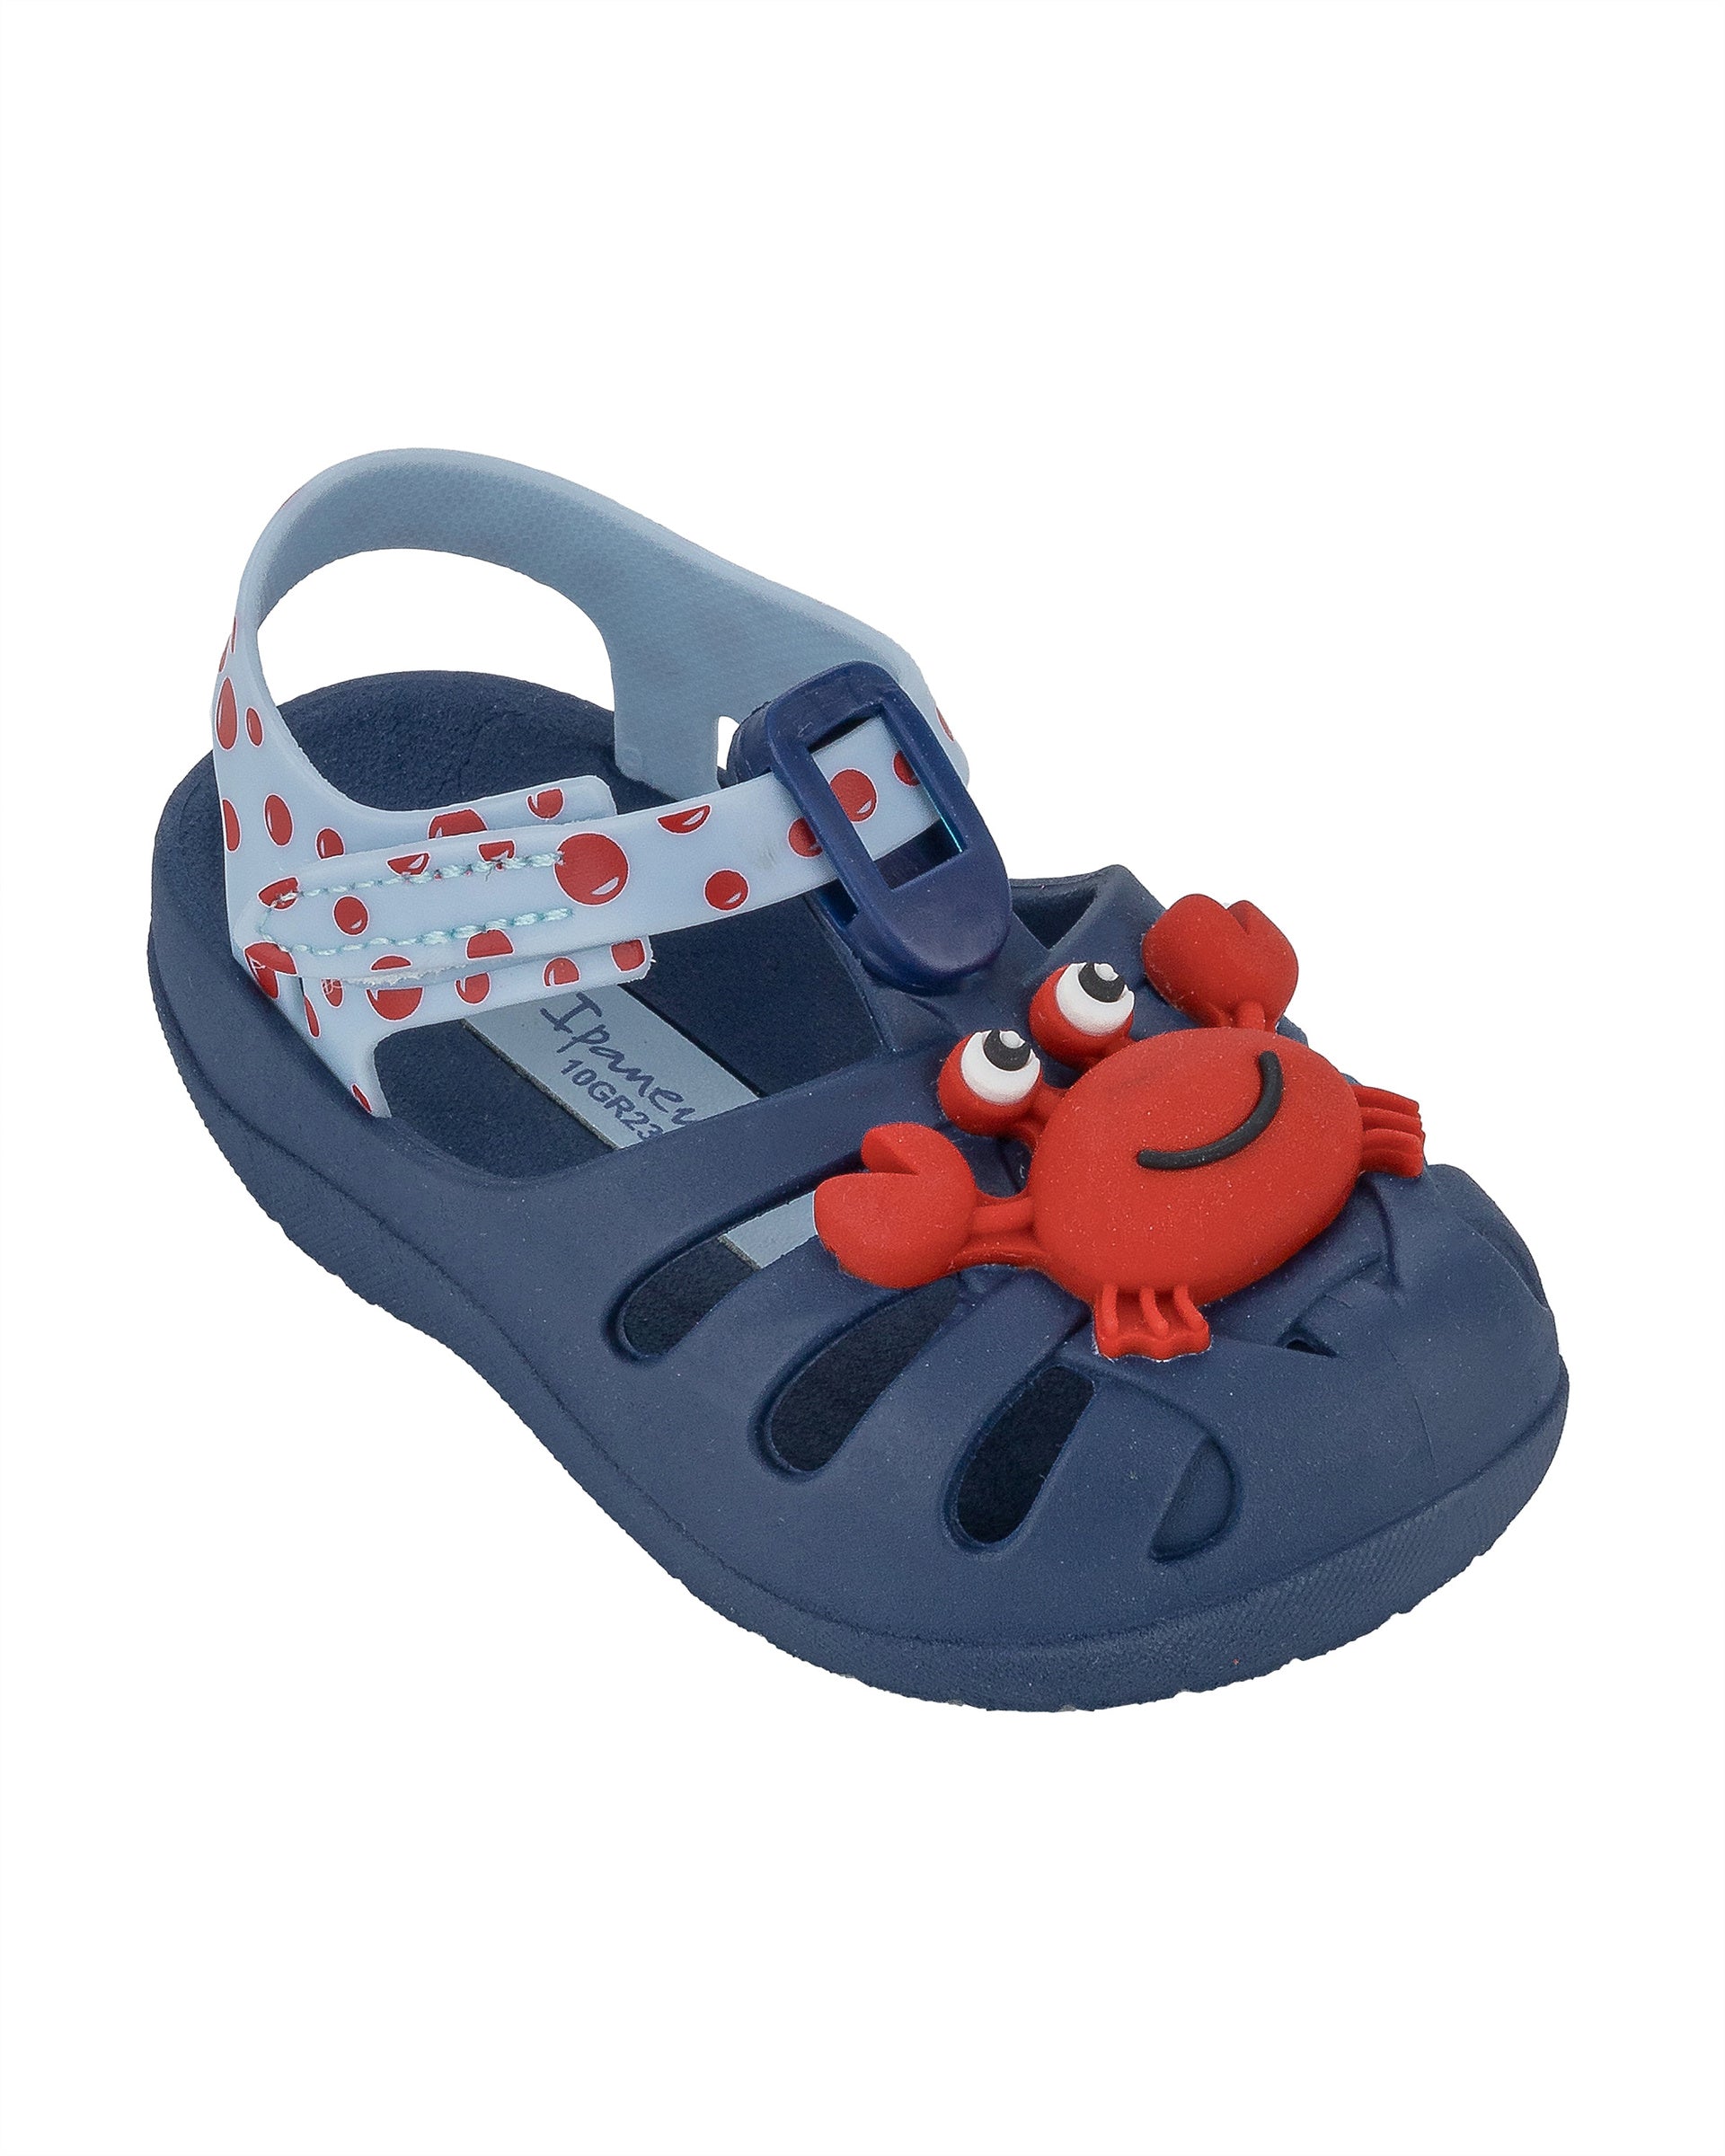 Angled view of a blue/light blue Ipanema Summer baby fisherman sandal with red crab on the upper.